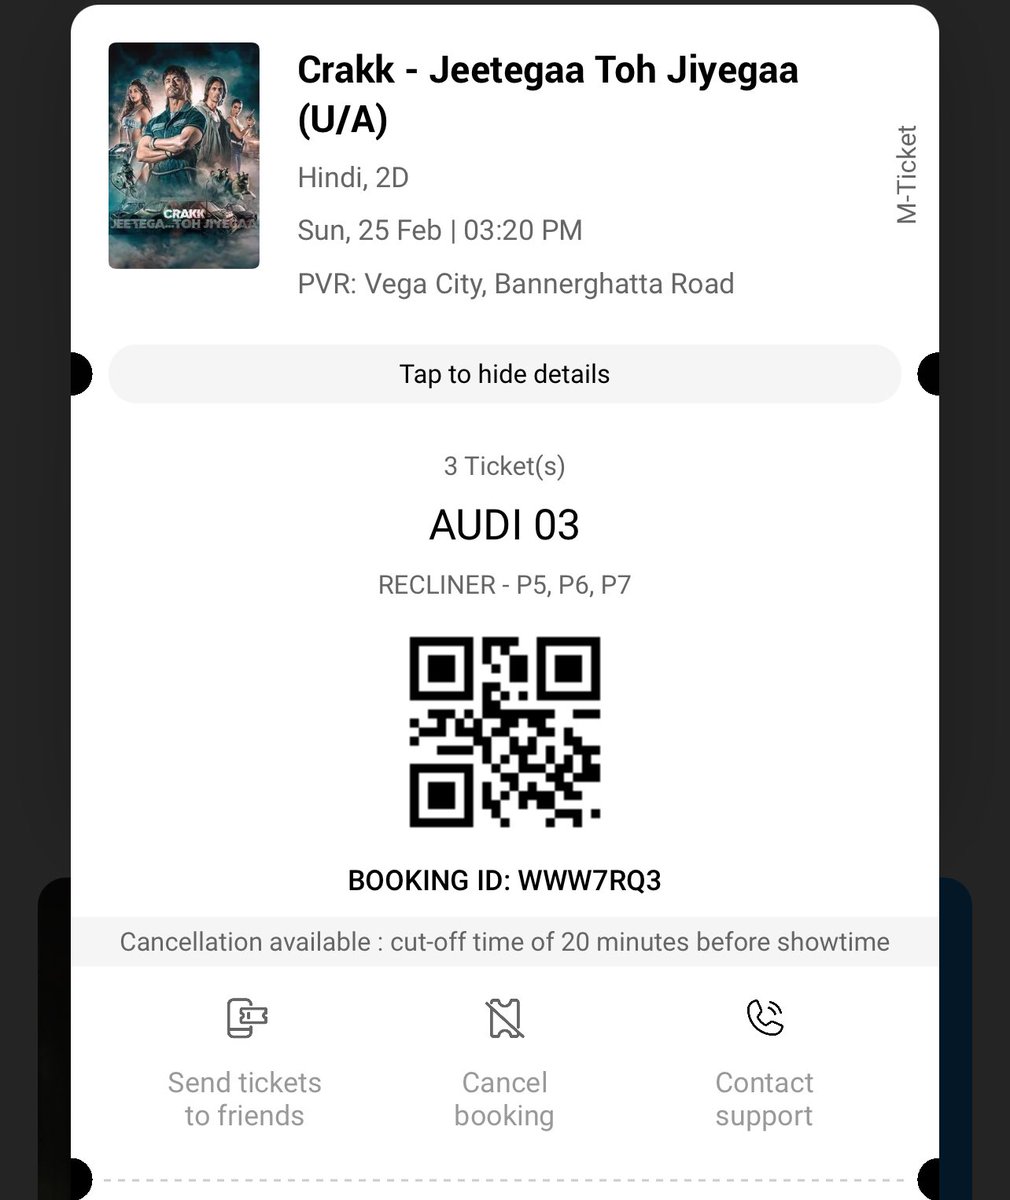 My tickets are finally booked for #Crakk @VidyutJammwal so excited to see you again on big screen ❤️